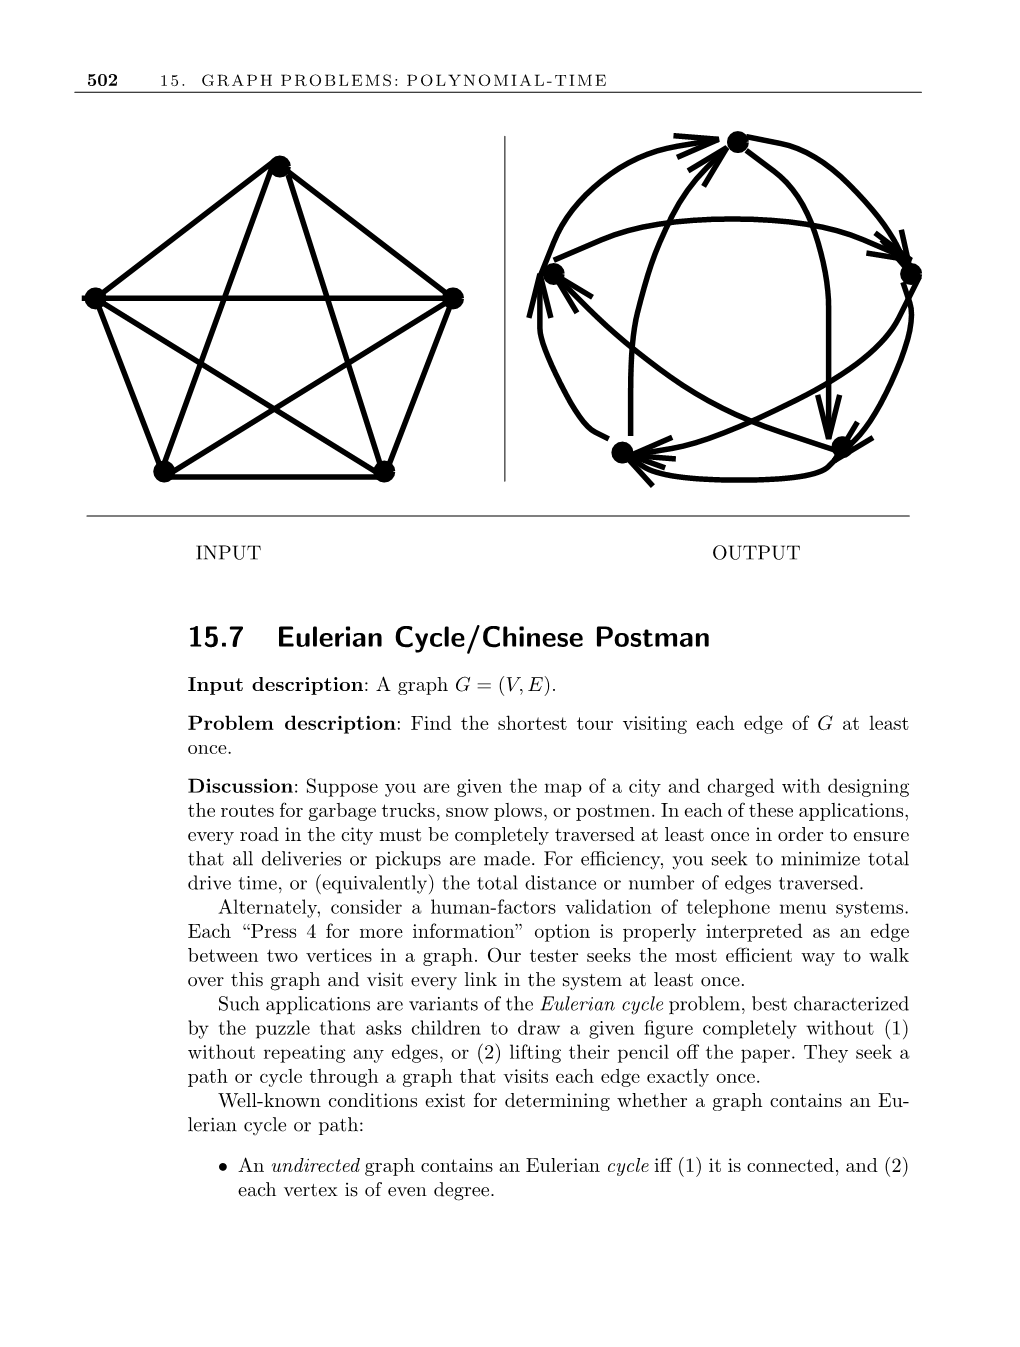 15.7 Eulerian Cycle/Chinese Postman